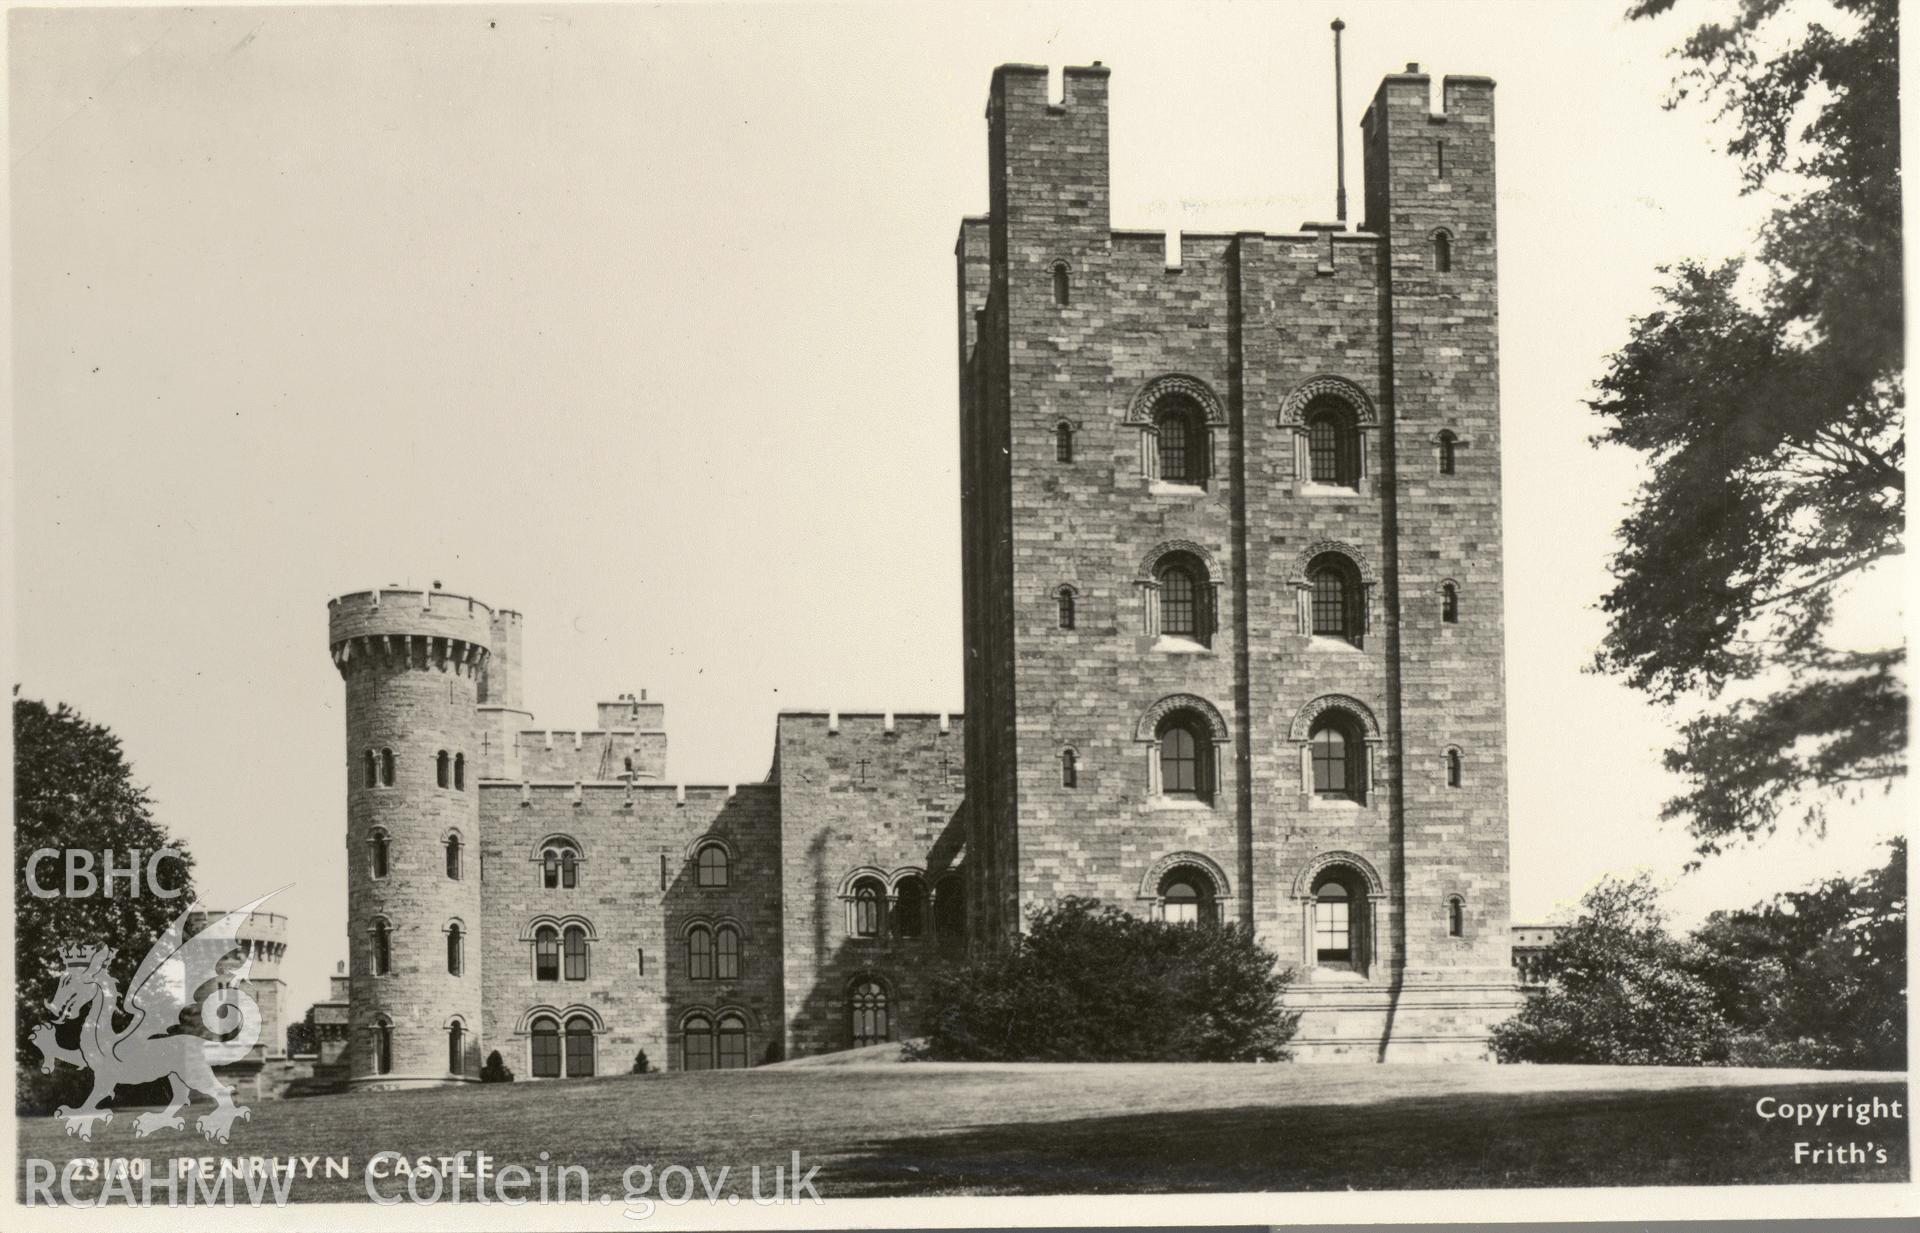 Digitised postcard image of Penrhyn Castle, Bangor, Frith's Series. Produced by Parks and Gardens Data Services, from an original item in the Peter Davis Collection at Parks and Gardens UK. We hold only web-resolution images of this collection, suitable for viewing on screen and for research purposes only. We do not hold the original images, or publication quality scans.